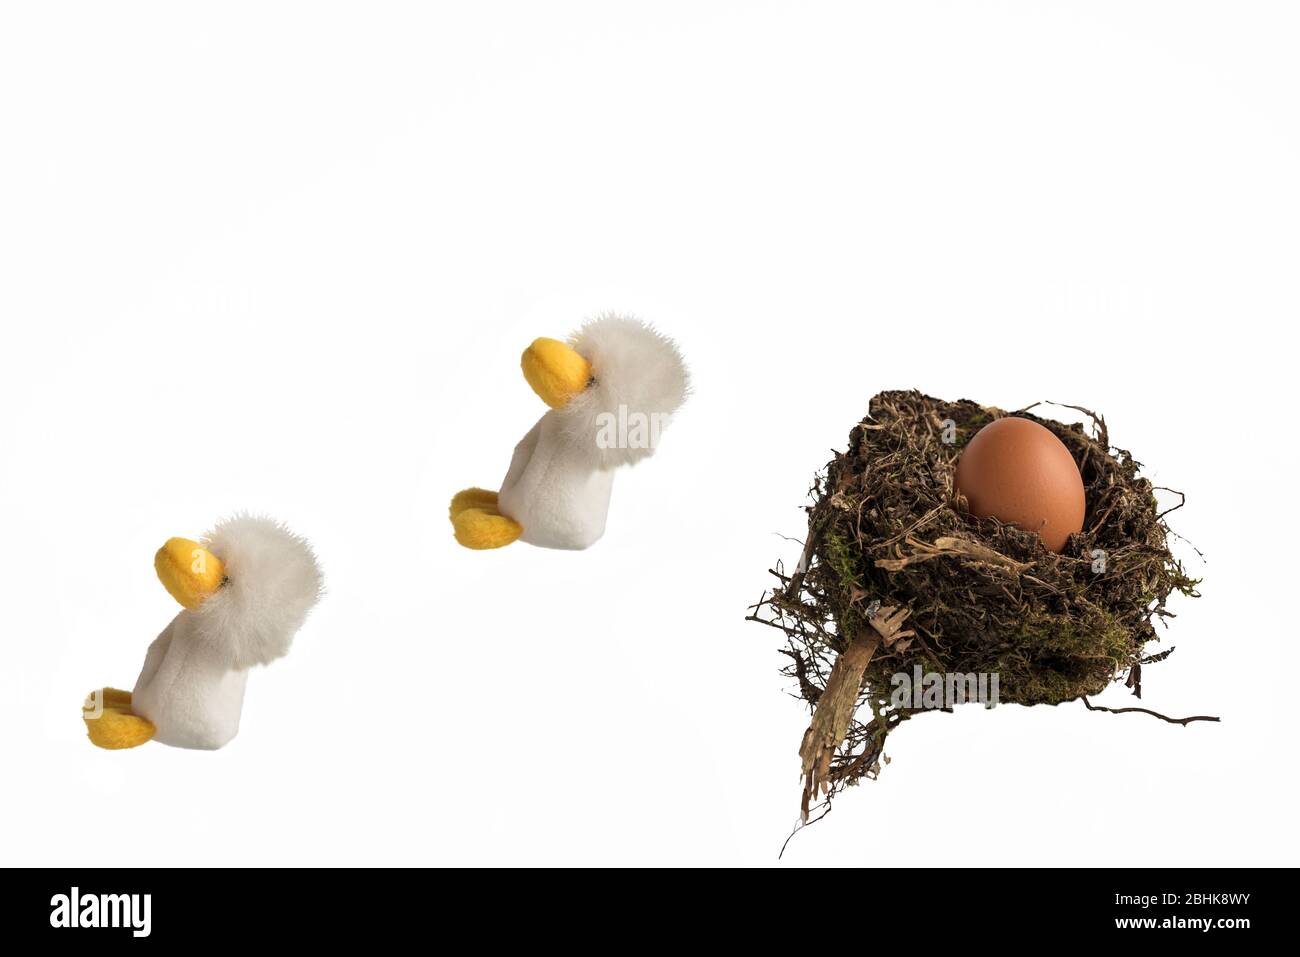 Two fluffy toy chicks jumping out of a real birds nest containing a chicken's egg against a white background. Concept; Fleeing the nest, leaving home. Stock Photo